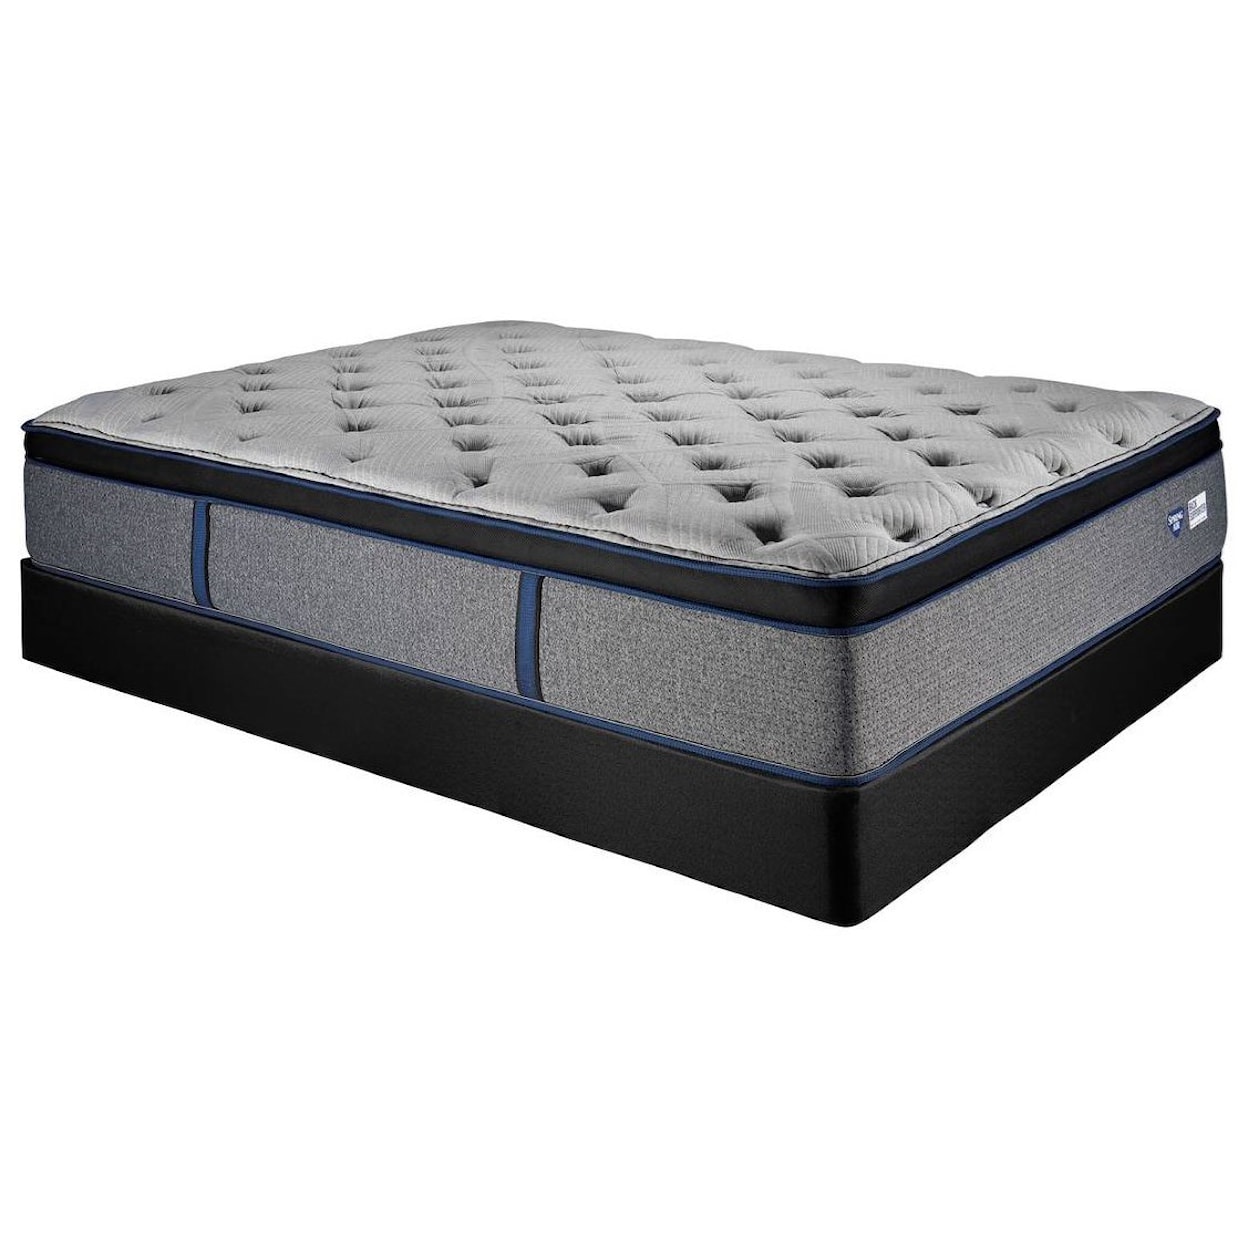 Spring Air Calypso ET Cal King Pocketed Coil Mattress Low Pro Set